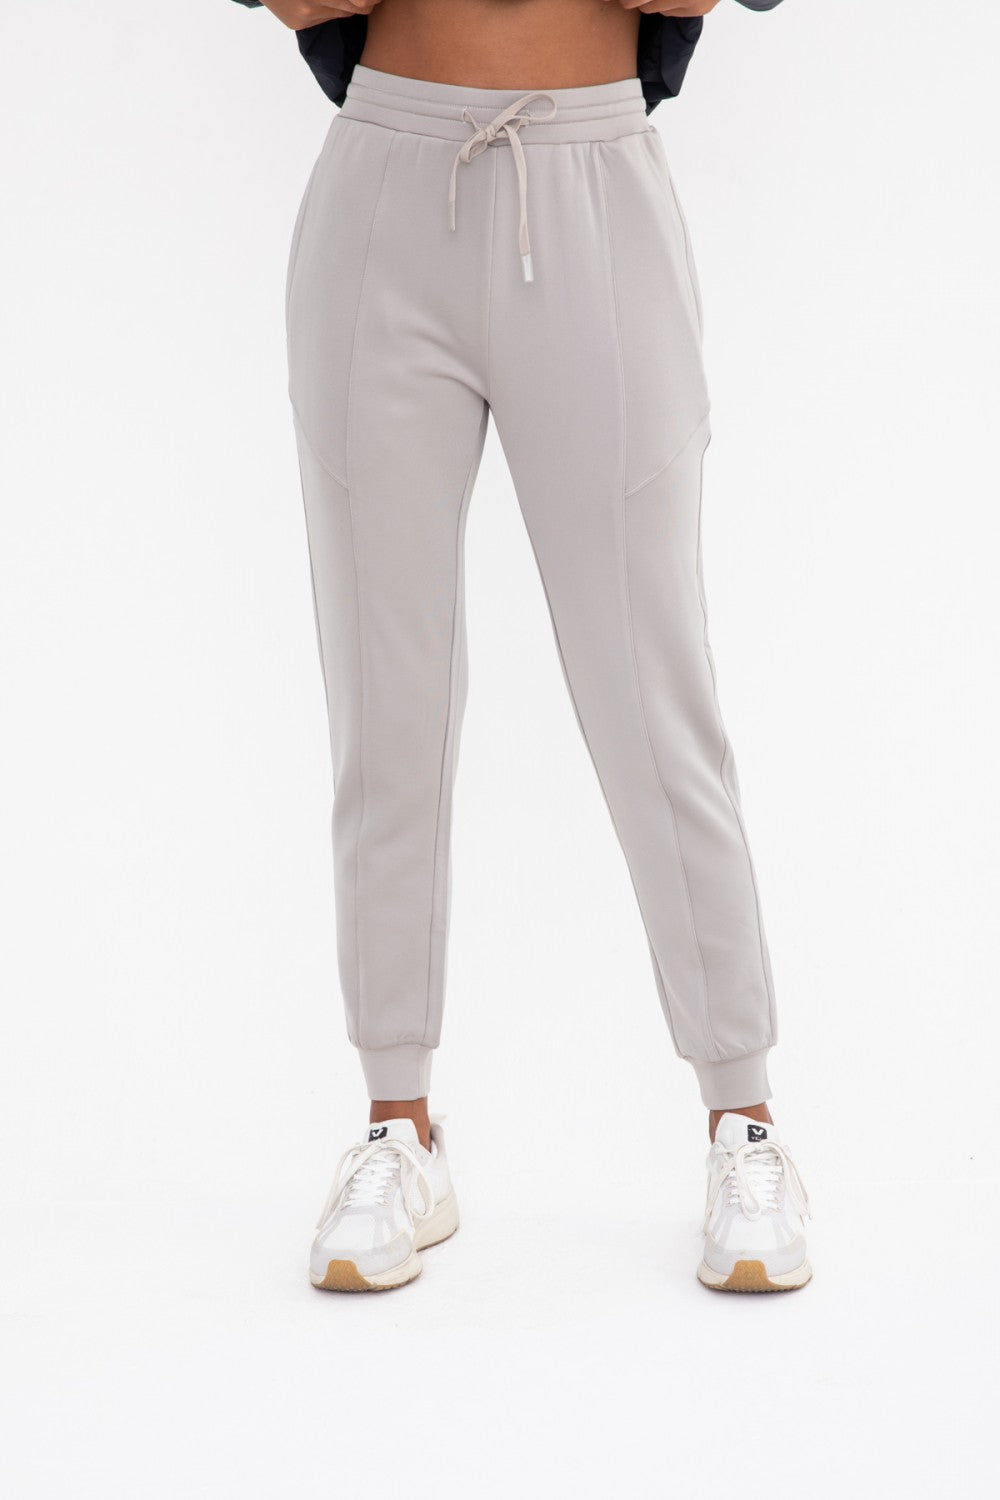 Cuffed Joggers with Zippered Pockets in 2 colors